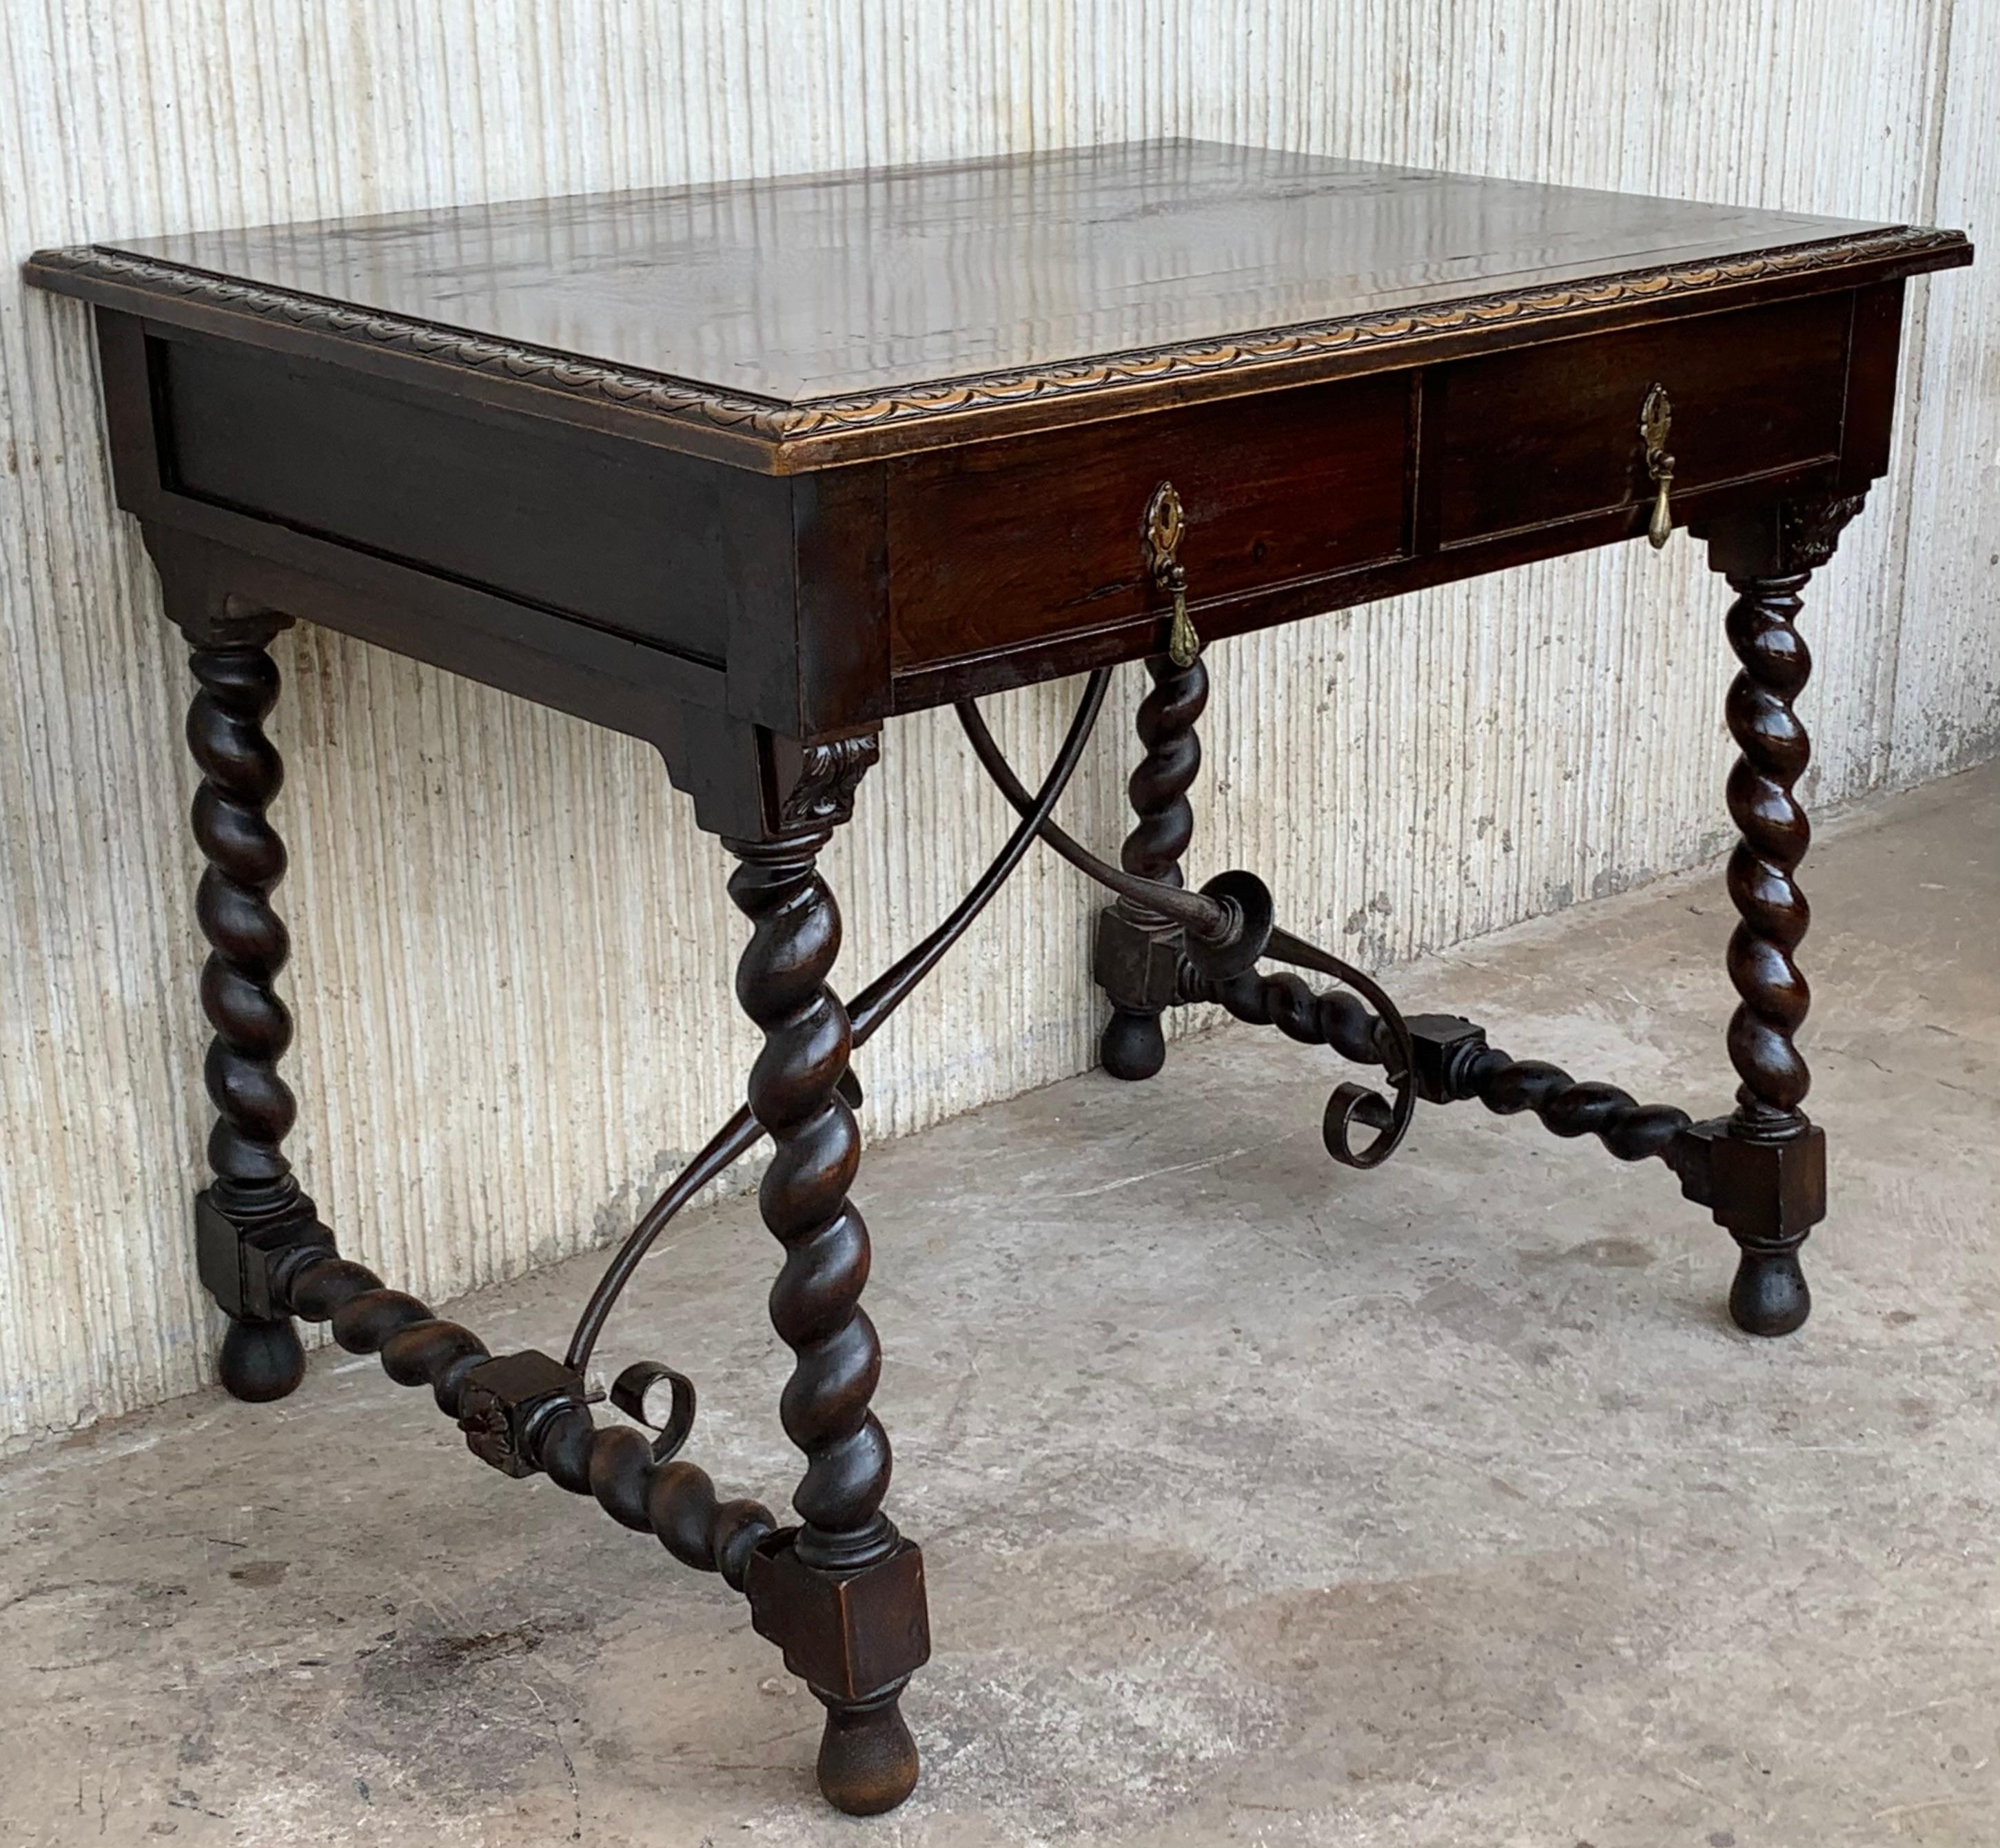 19th Spanish walnut desk with two drawers and solomonic turning legs , it has an iron stretcher between the legs.
The top is made of walnut with a beautiful carved edge.
The back of the table is carved featuring two no real drawers with